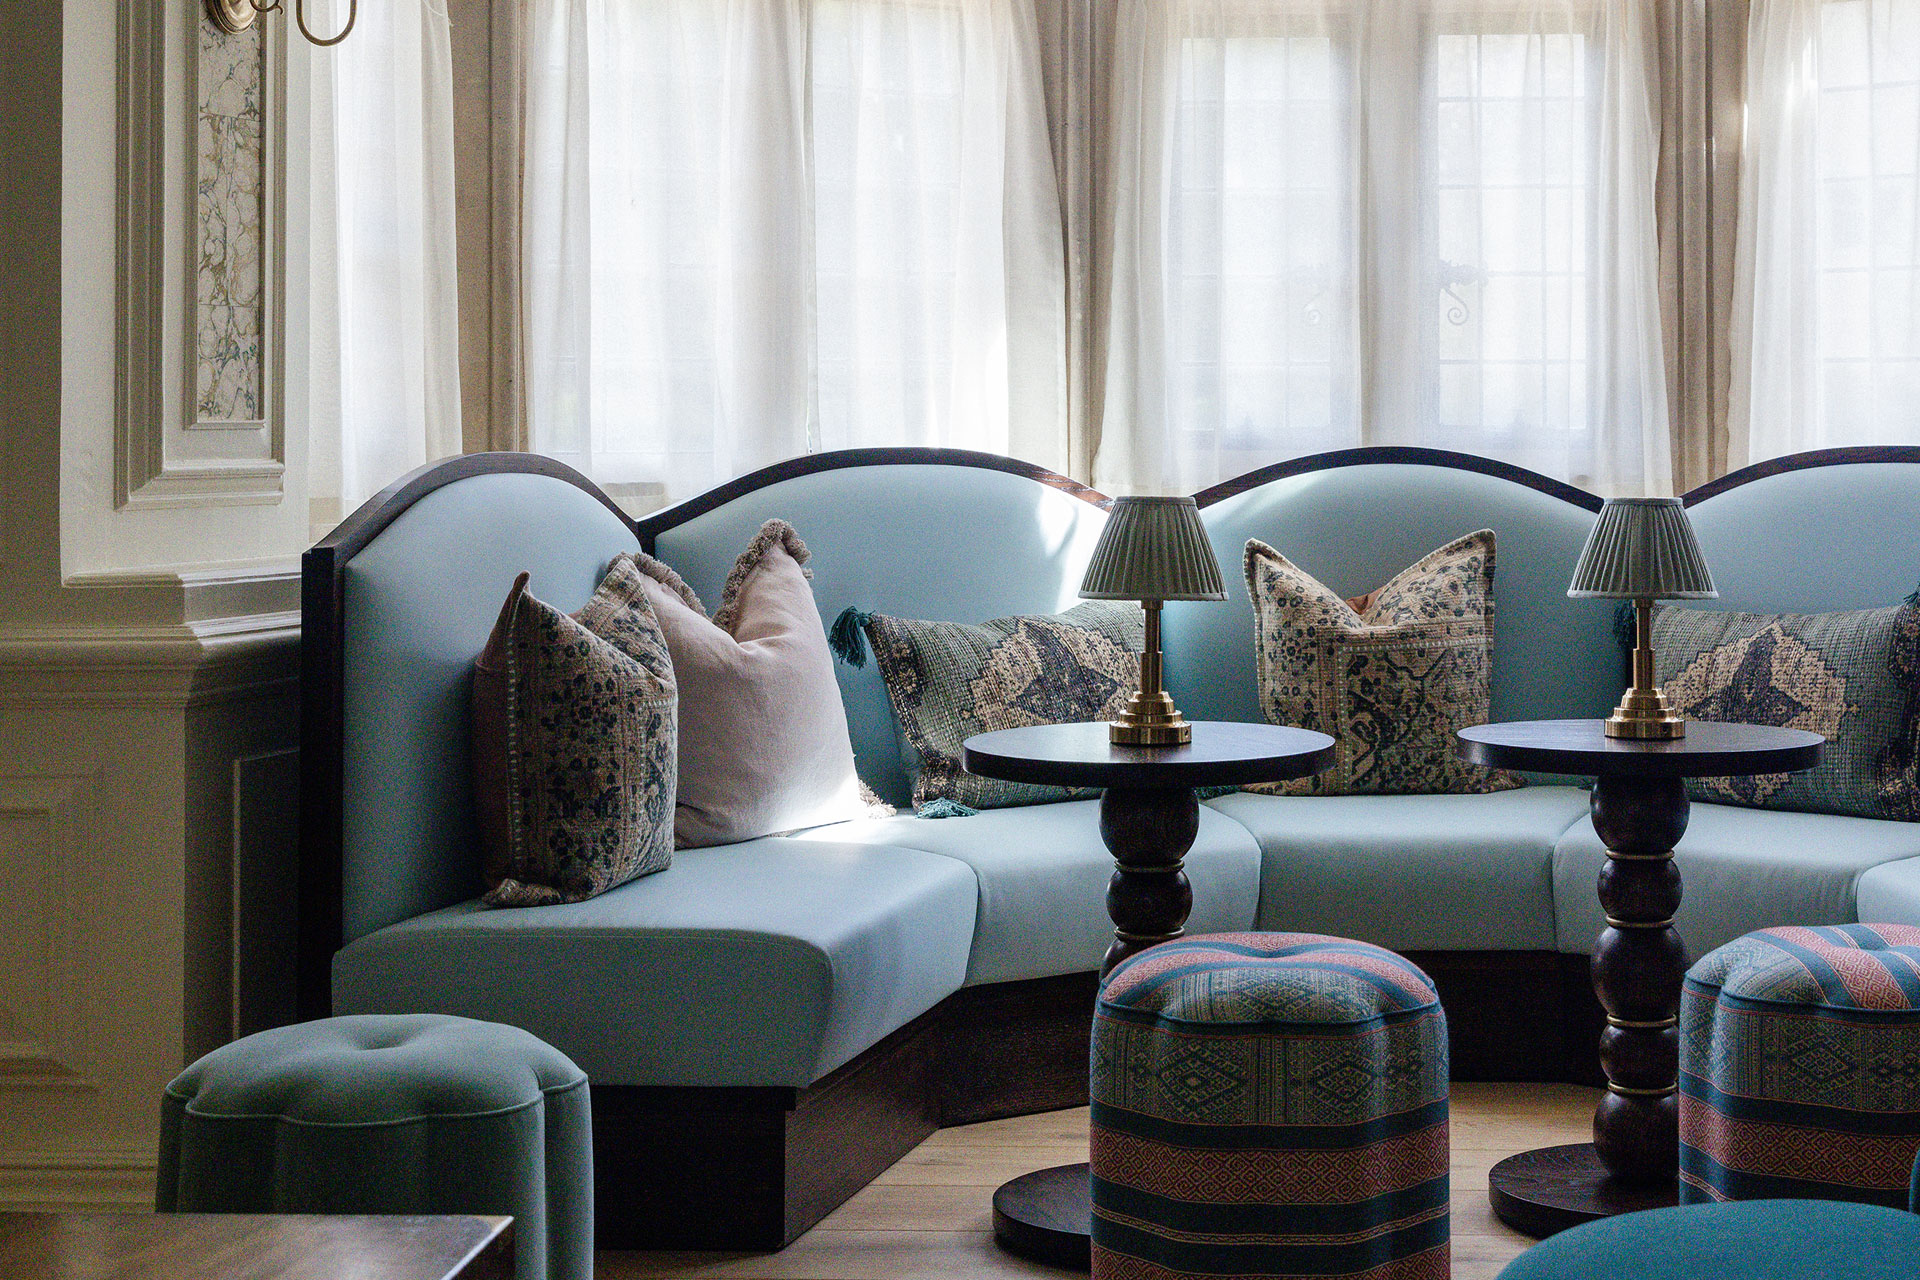 The living room at Kin House, with a blue sofa